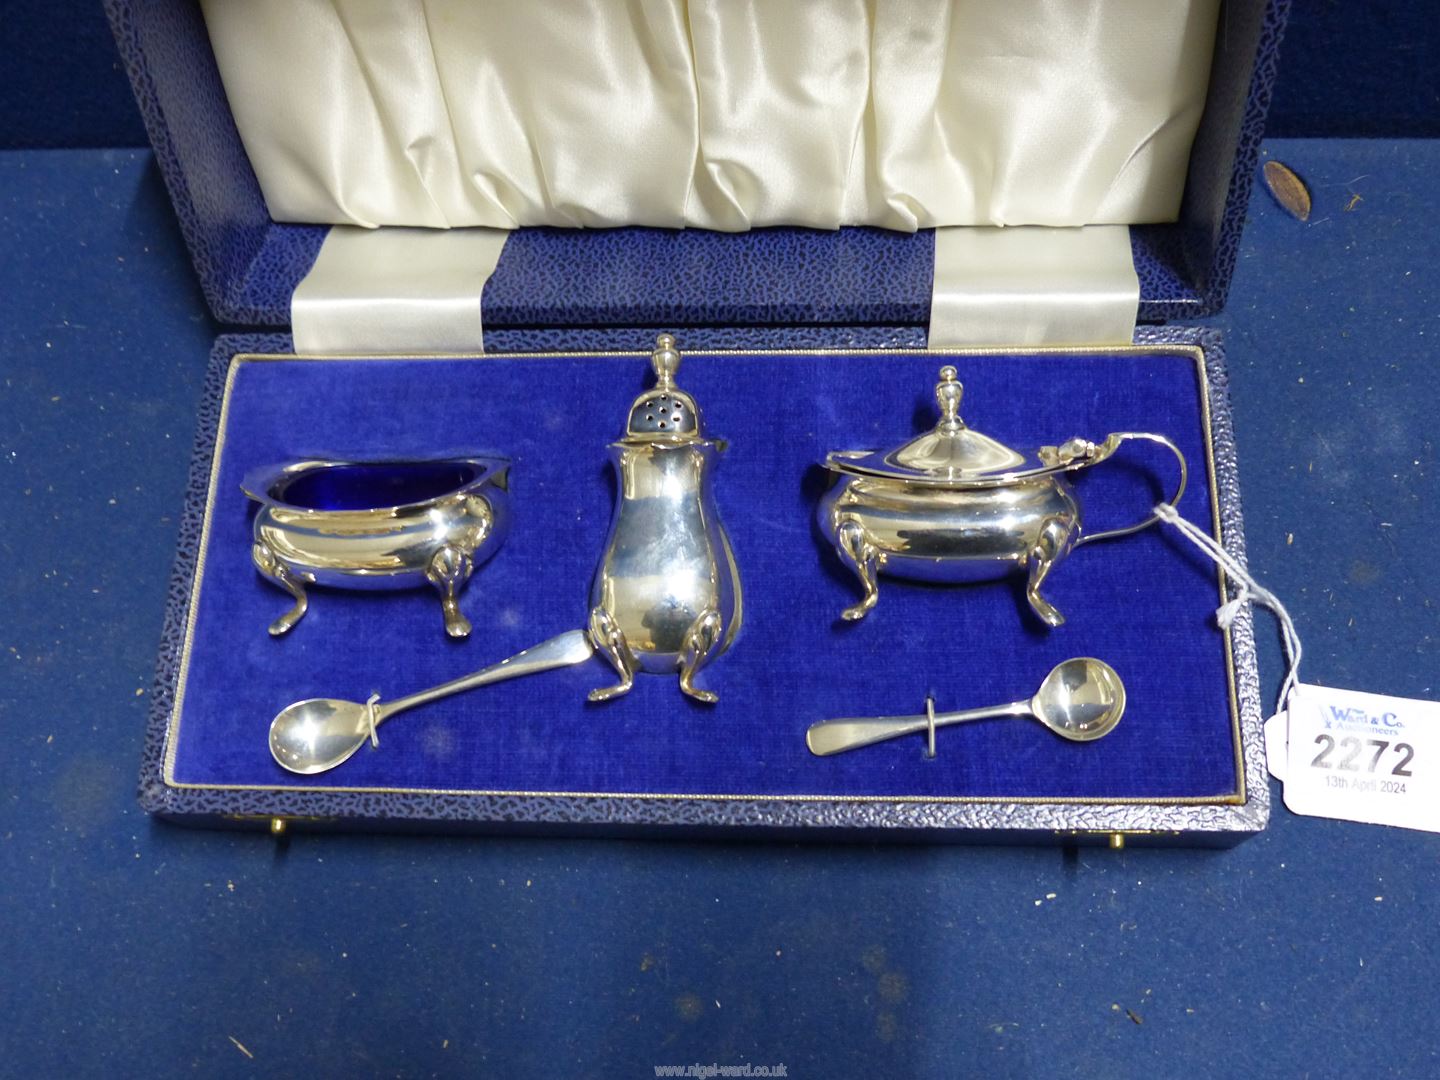 A boxed Mappin & Webb silver Cruet set complete with liners and spoons, - Image 2 of 2